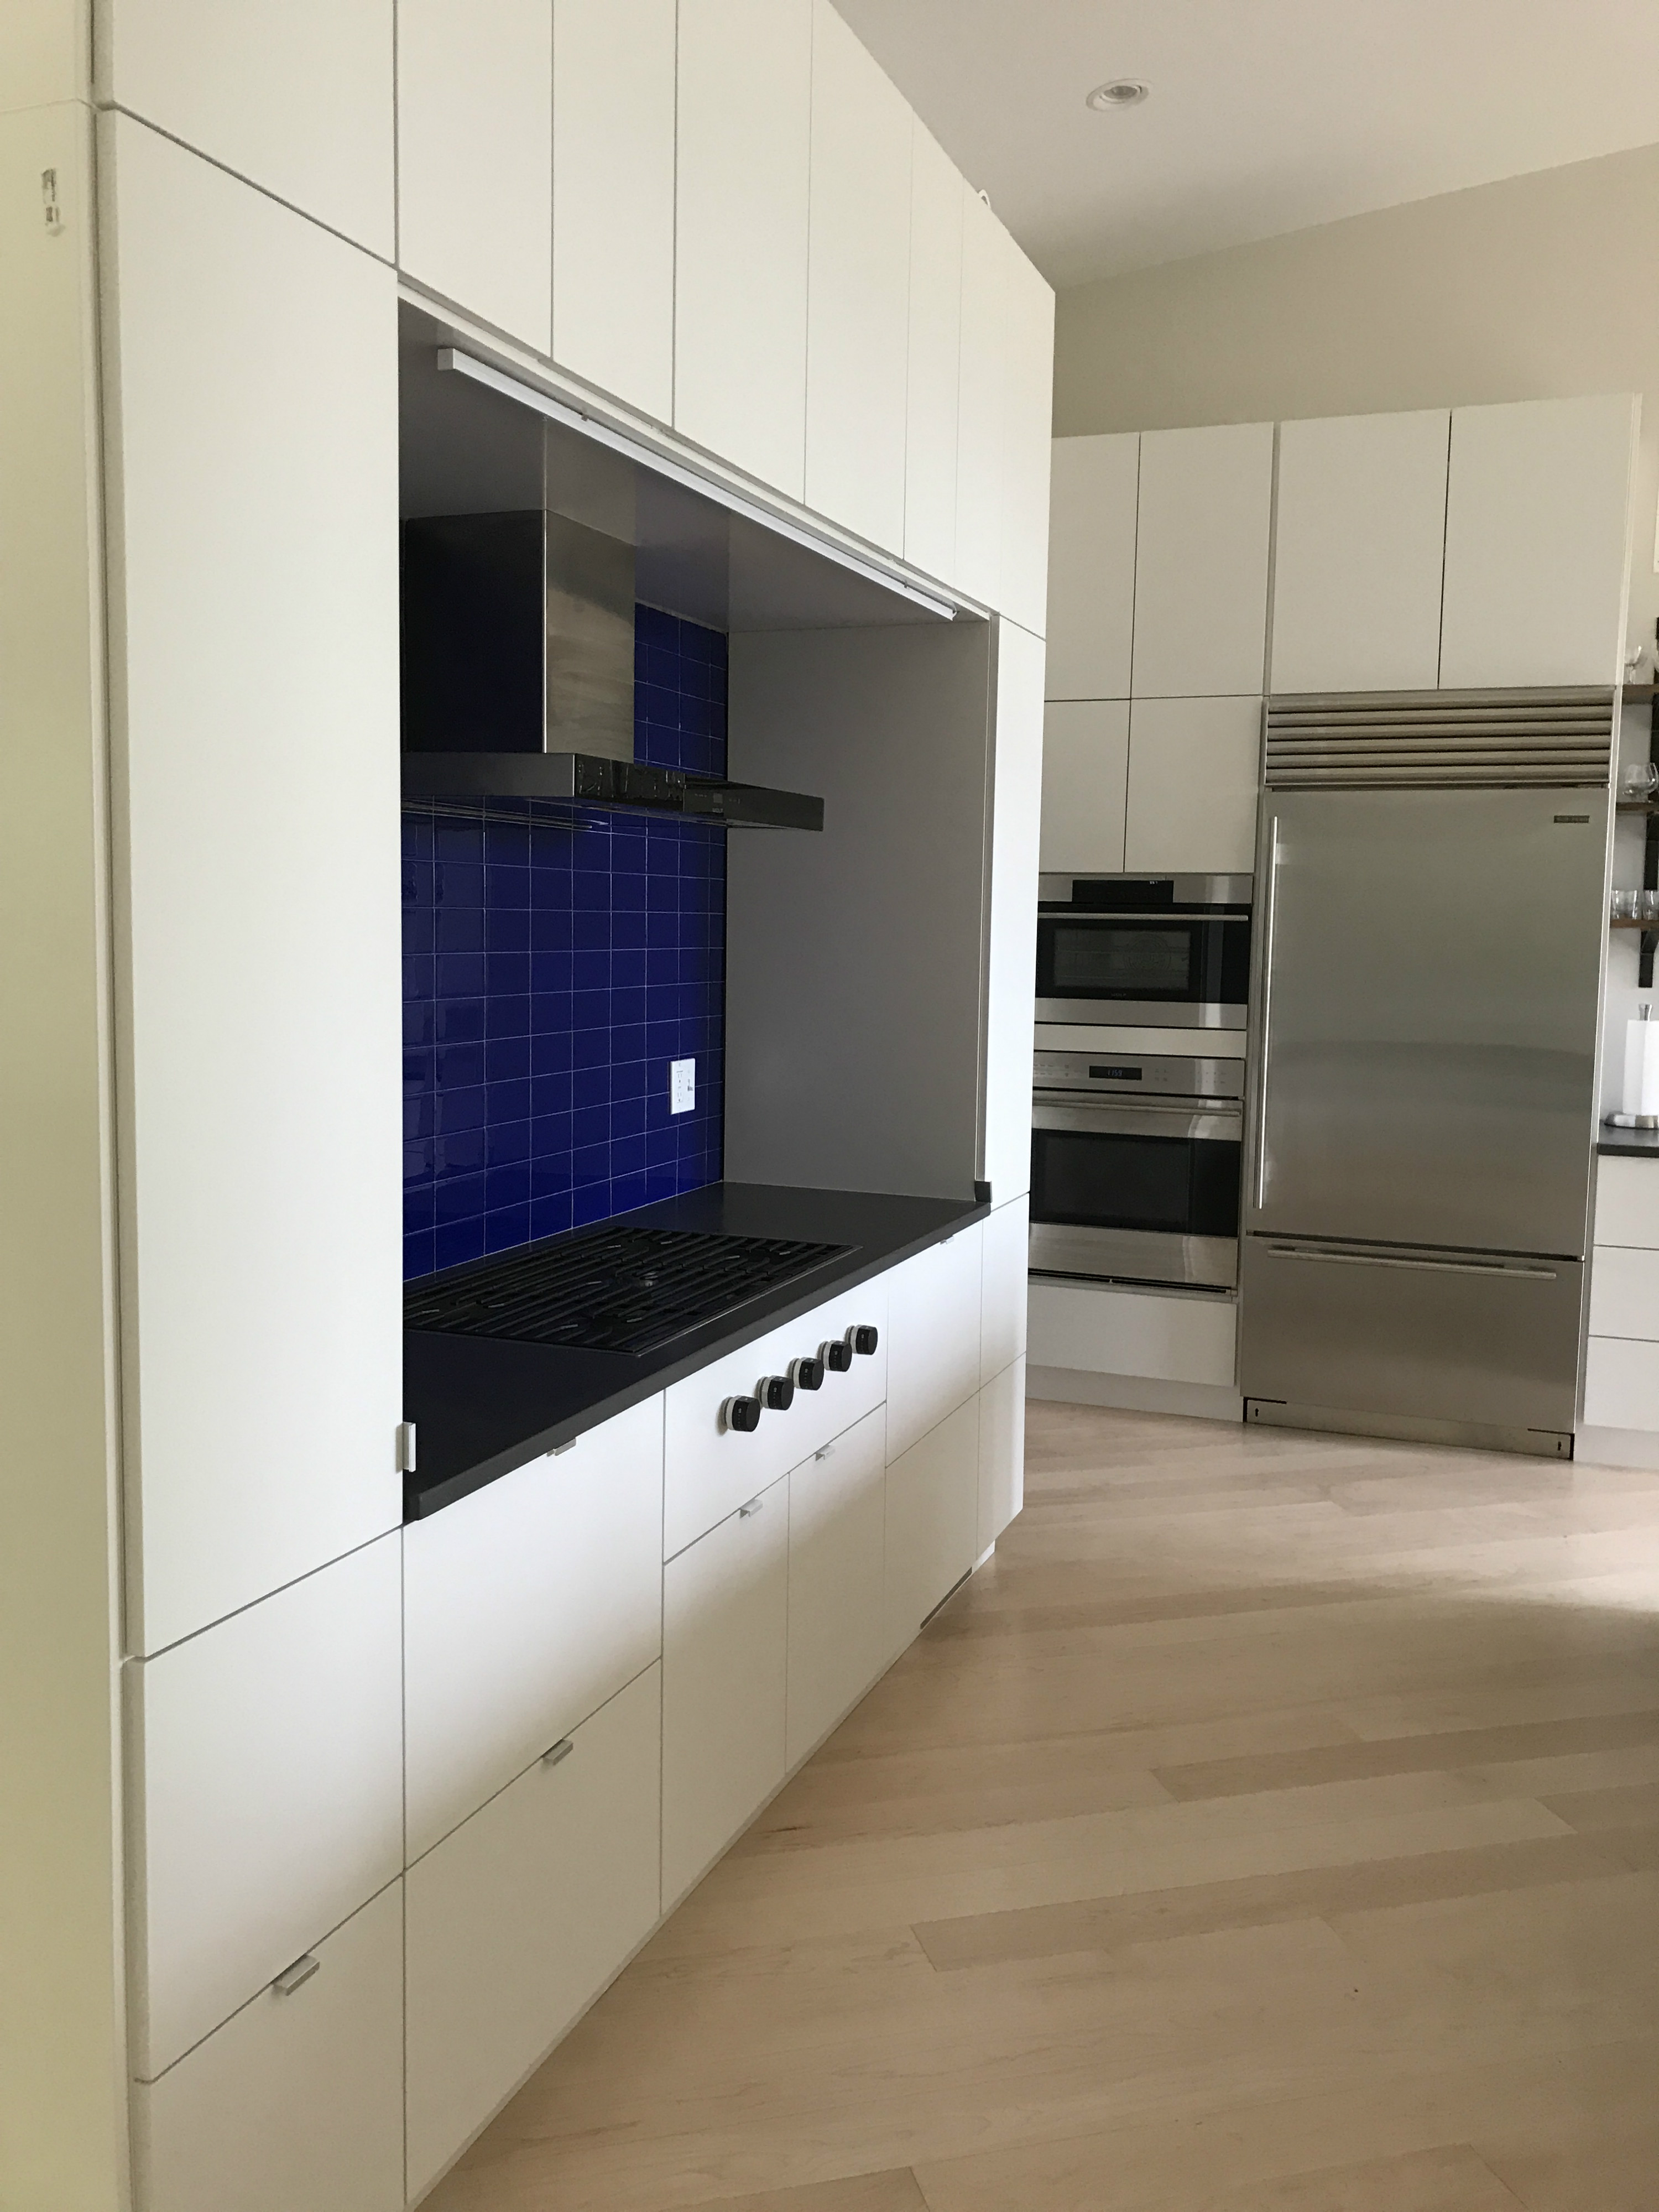 A Luxury Kitchen at a Fraction of the Cost (Thanks to IKEA)